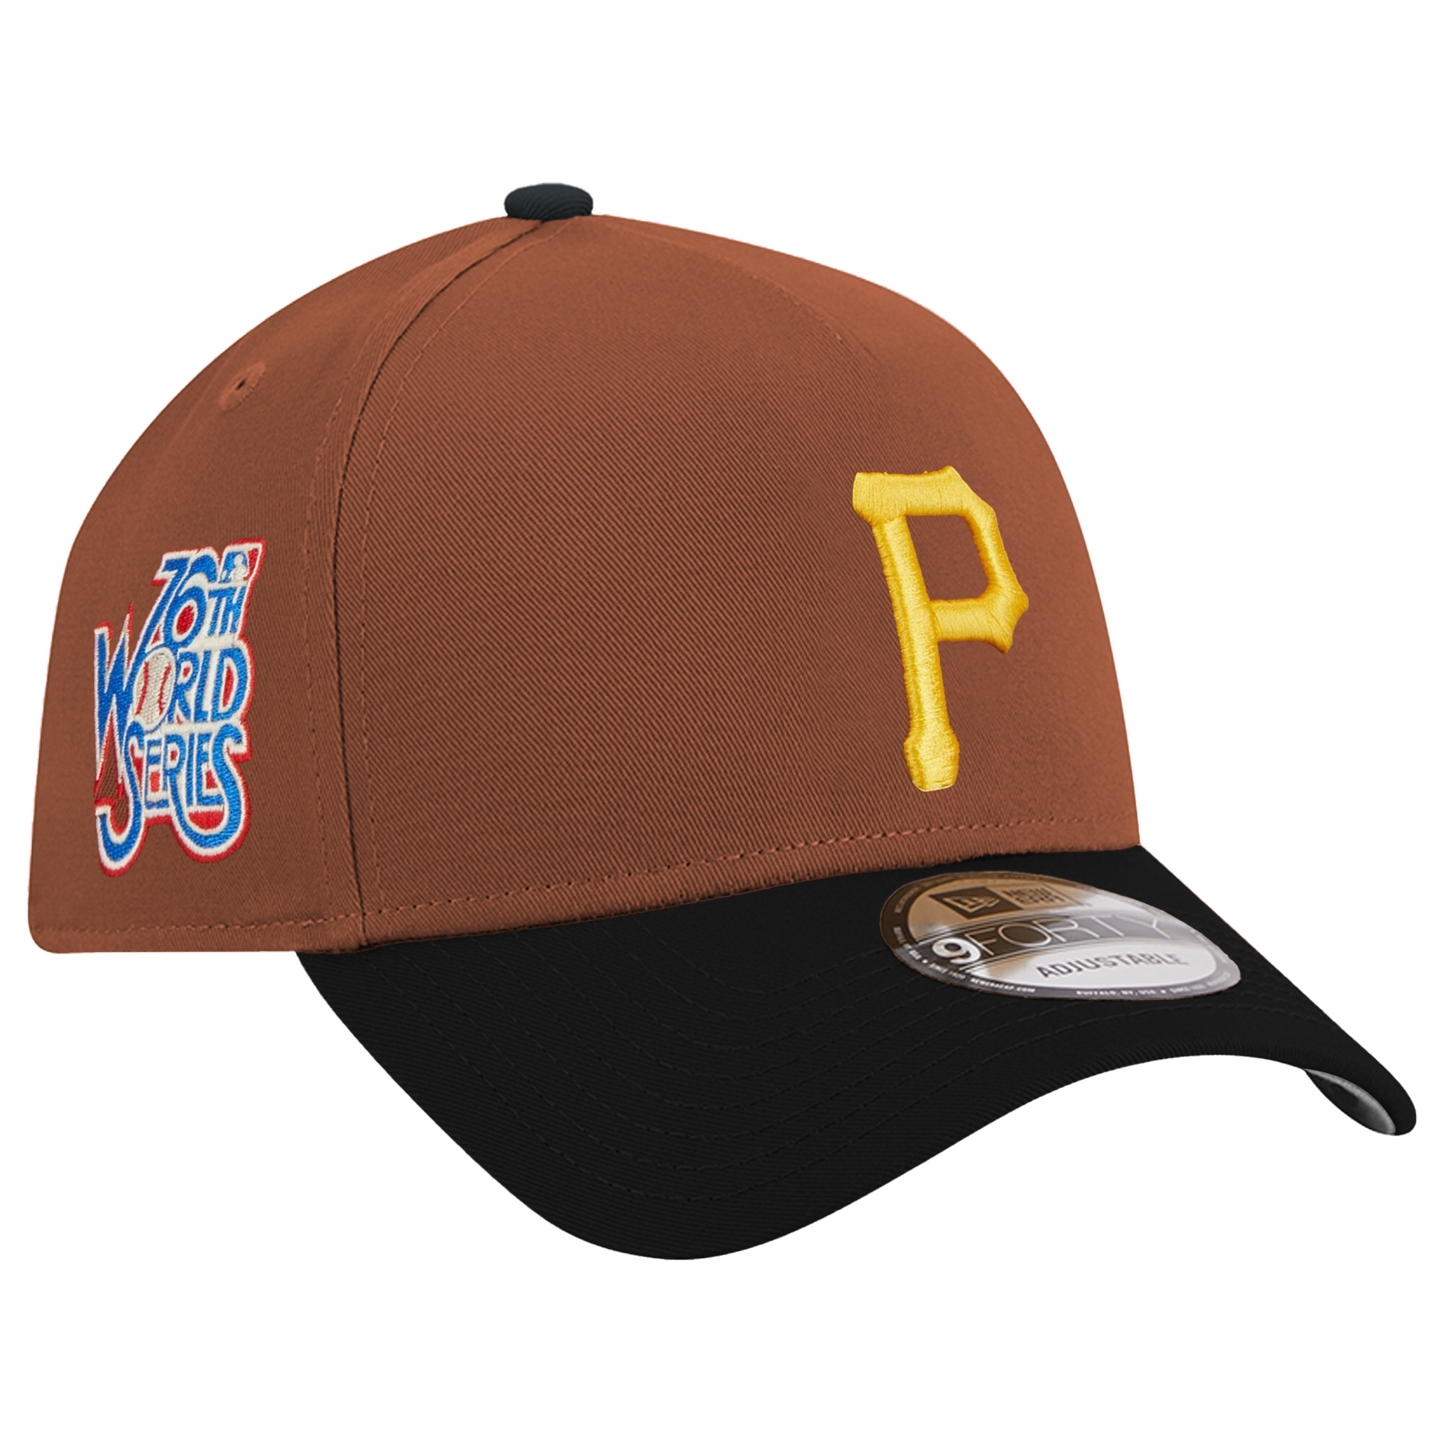 New Era 9FORTY Pittsburgh Pirates Sidepatch Snapback